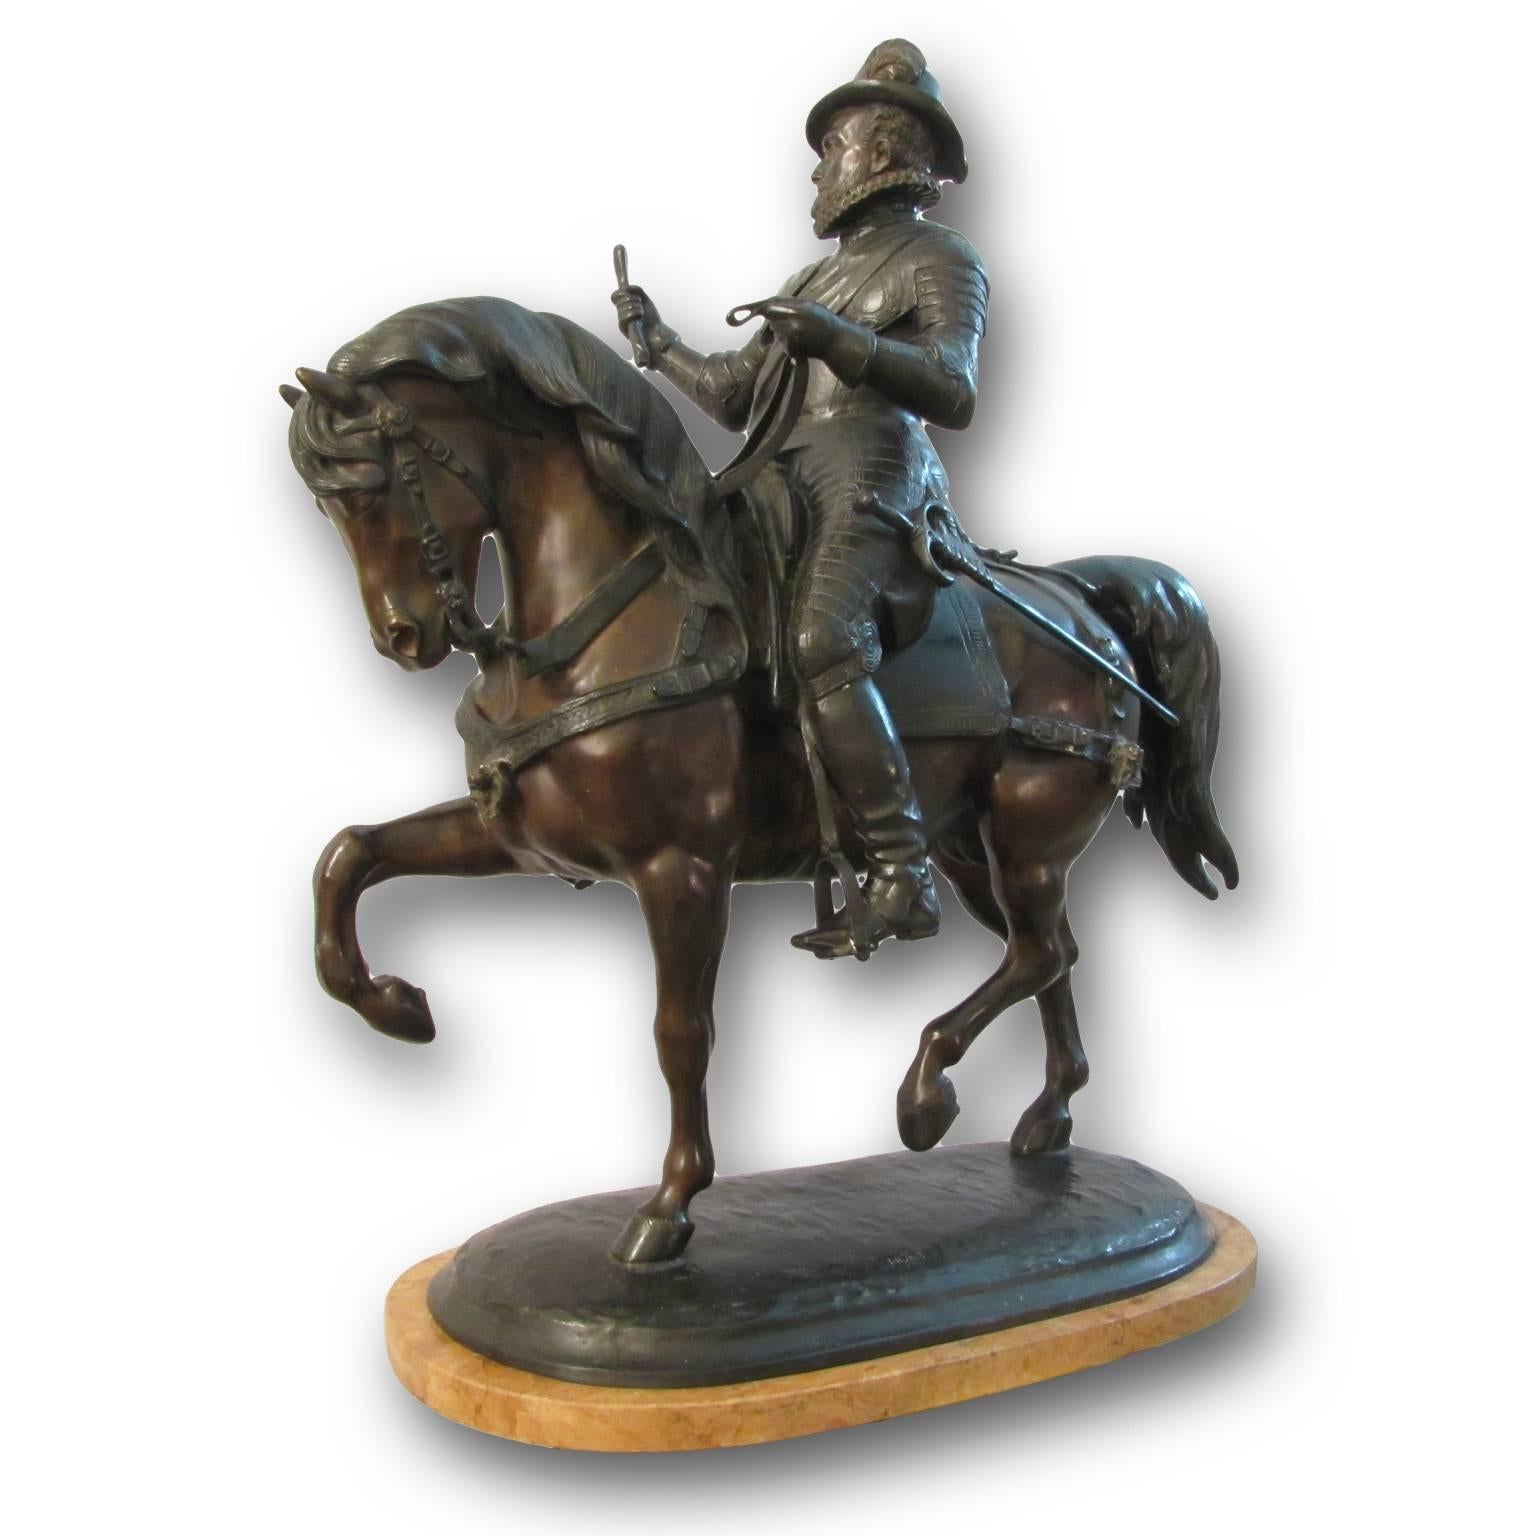 A very detailed, exquisite statuette, entirely executed in bronze with the lost-wax casting technique depicting Philip II of Spain. The patinated bronzes figure is mounted on a beautiful marble base.
Signed ‘Hunt’ on the base (James Hunt, 19th-20th